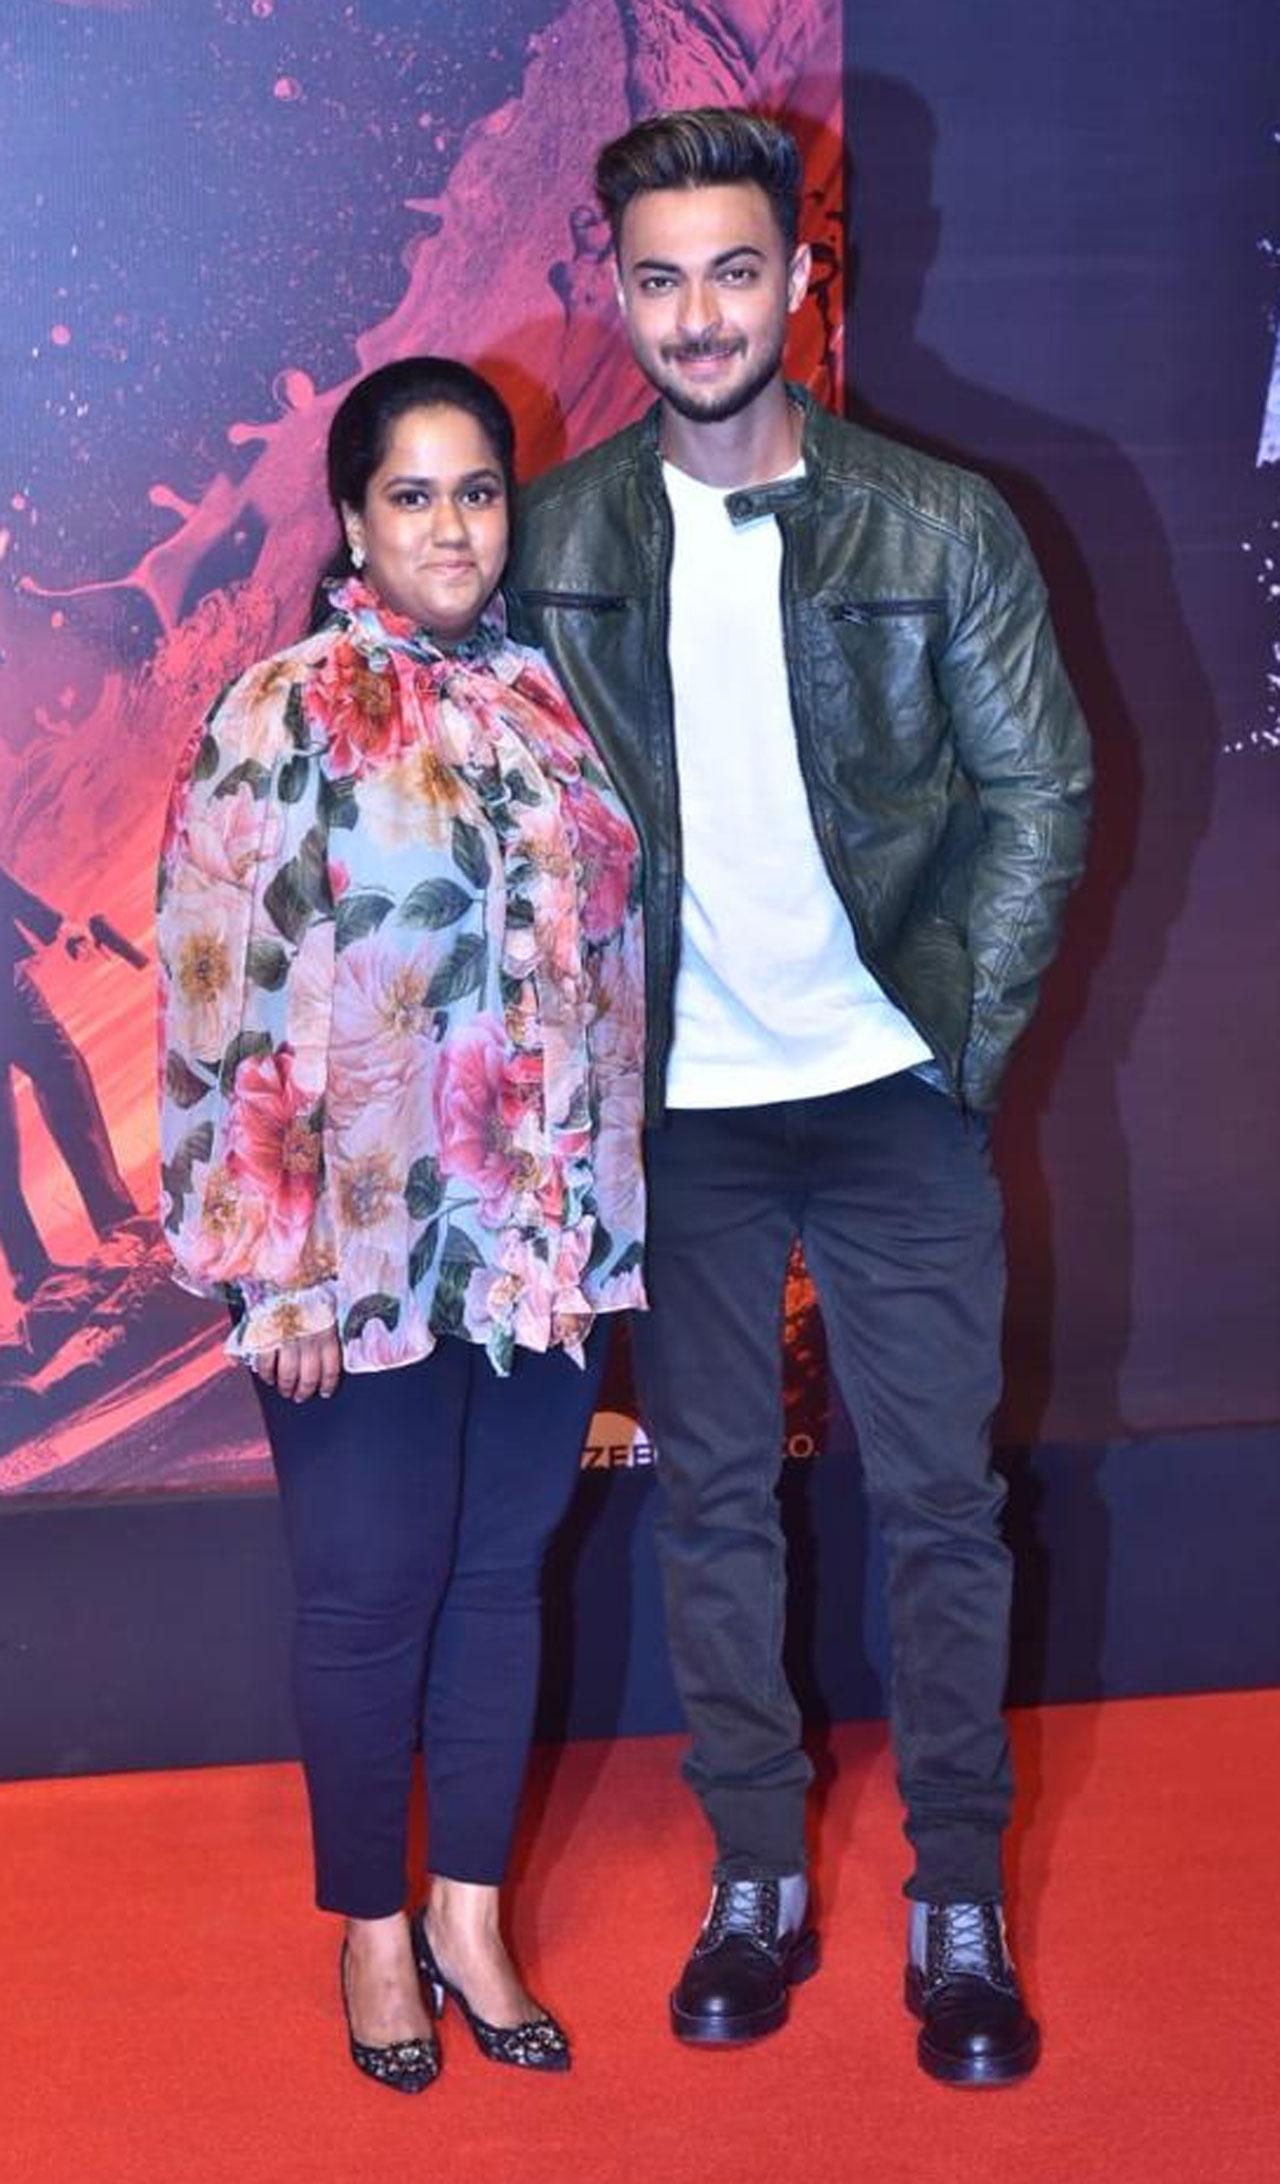 The actor then posed with his wife Arpita Khan Sharma. The two got married in November 2014 at the Taj Falaknuma Palace in Hyderabad and recently completed their seventh wedding anniversary. Their wedding bash was attended by stars like Aamir Khan, Sajid Nadiadwala and Mika Singh.